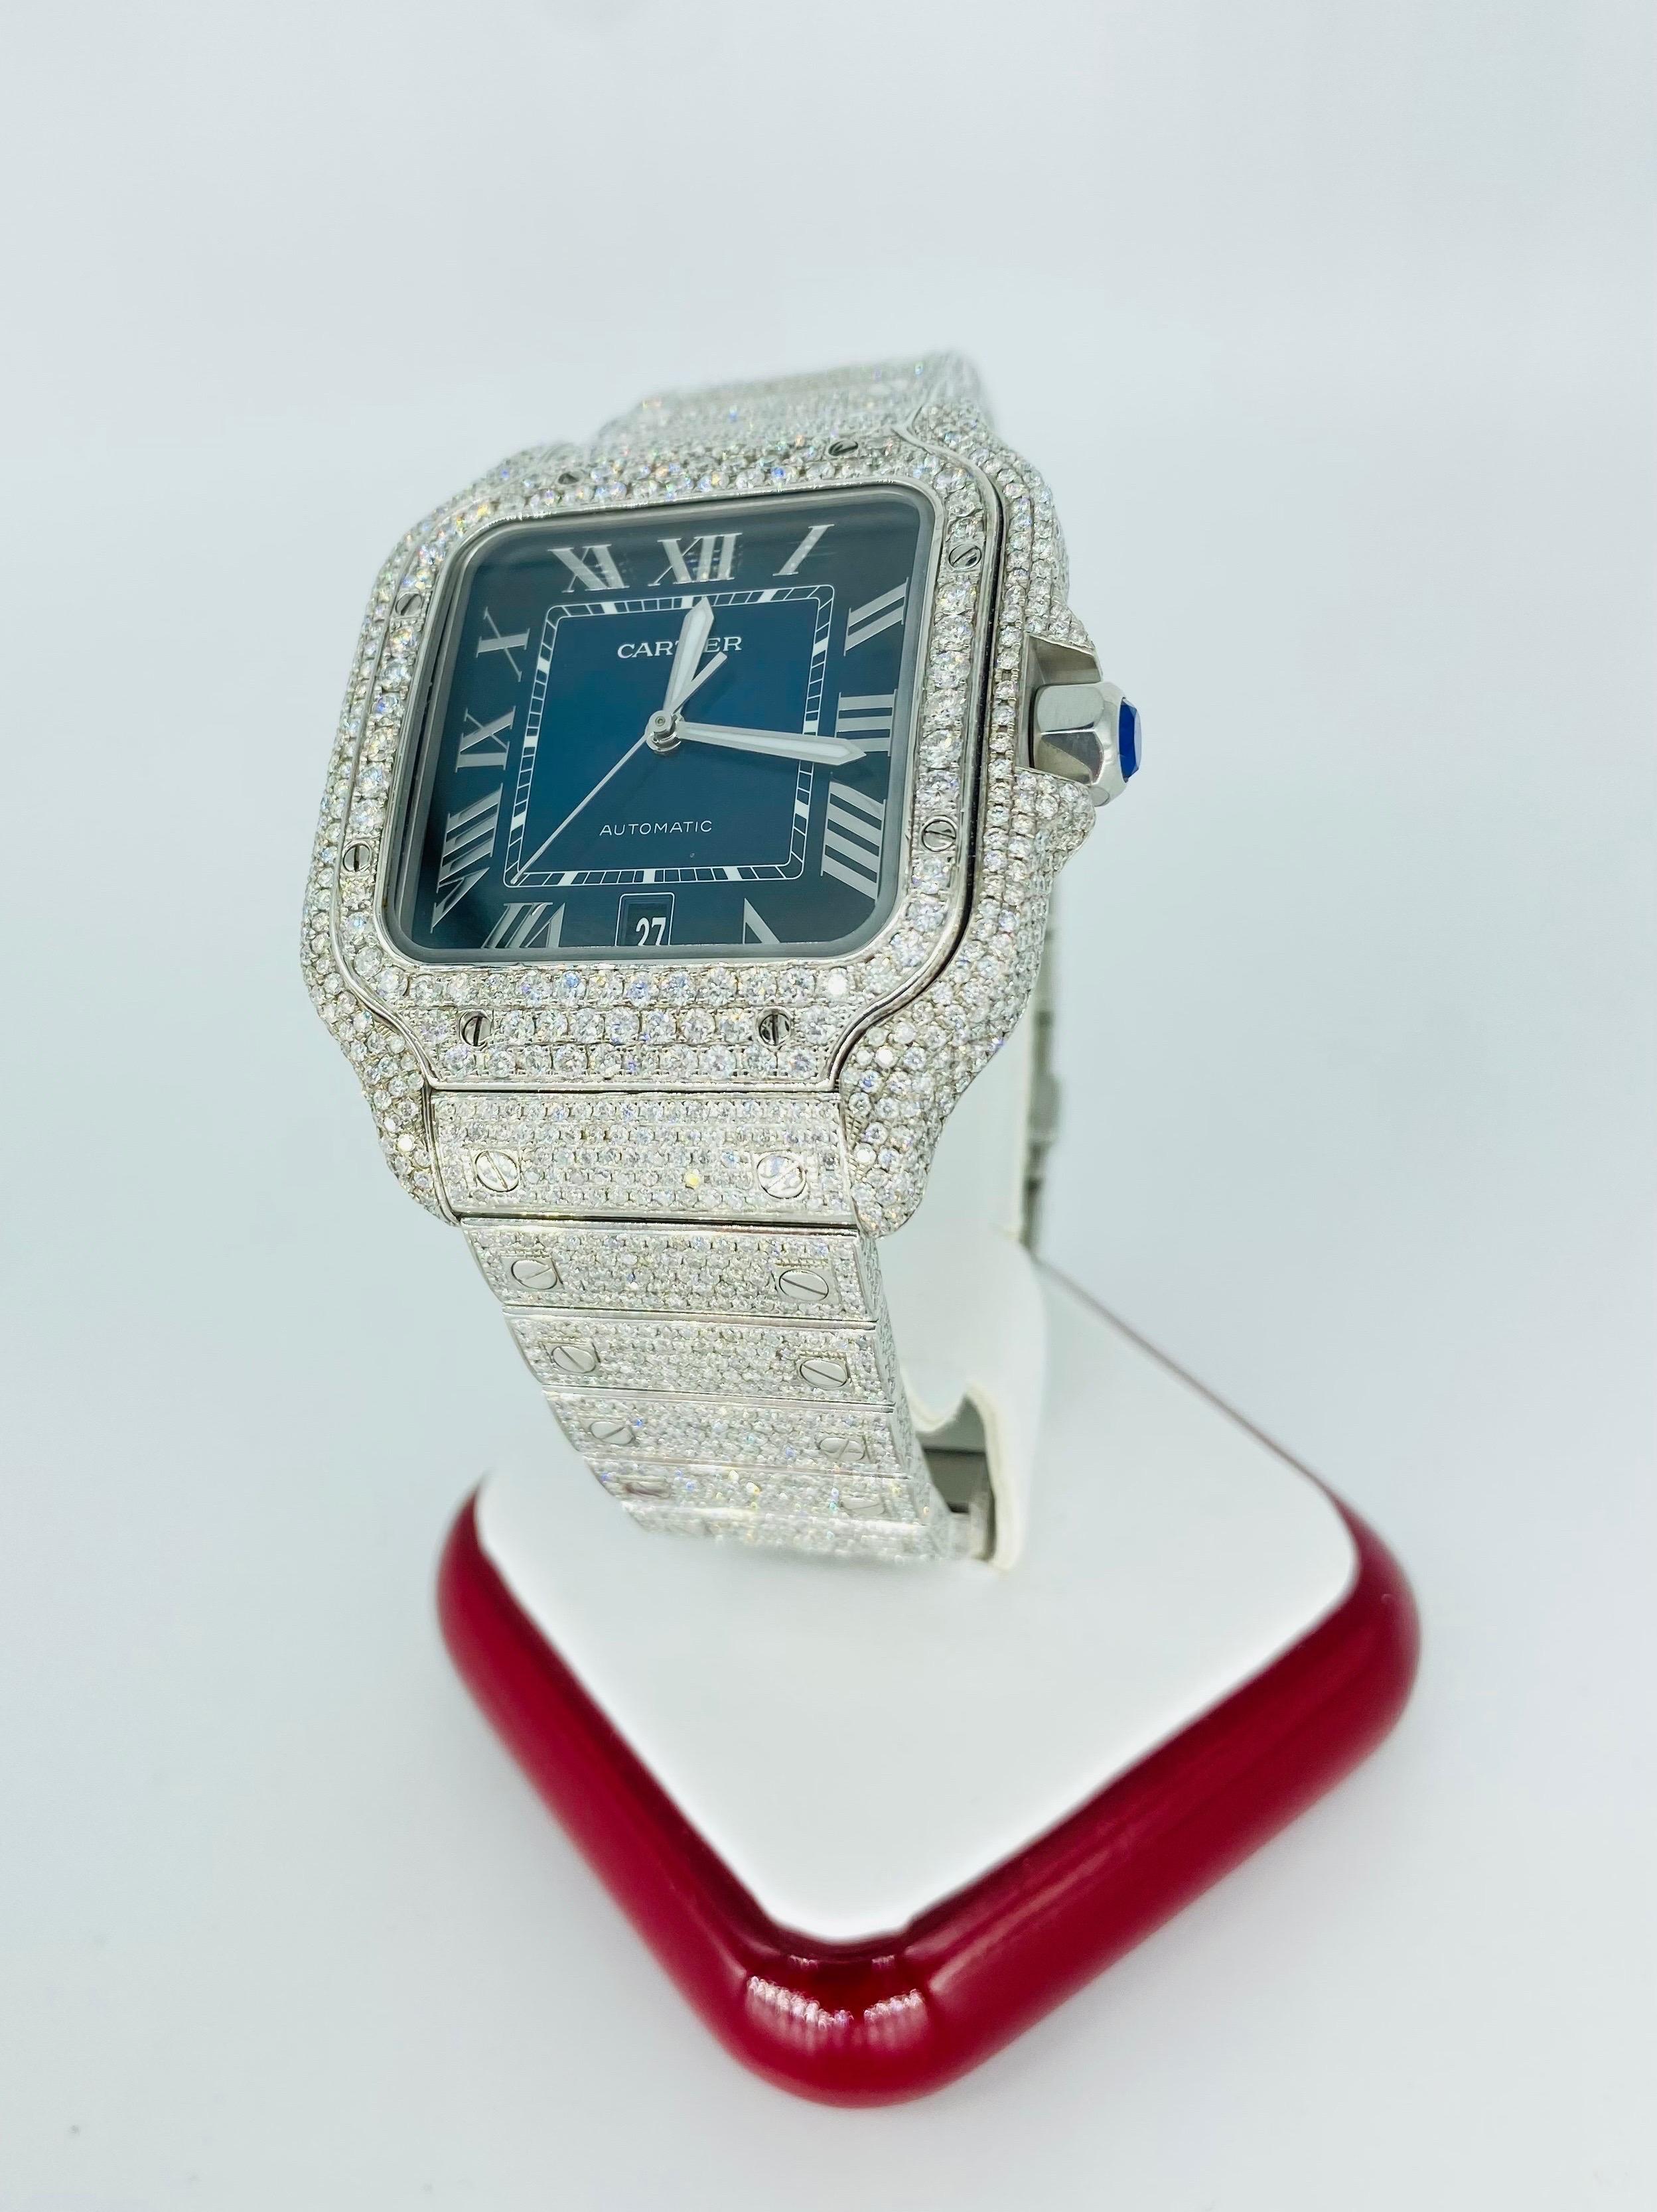 Very luxurious wristwatch by Cartier!
XL Model Approx 20 carats of natural diamonds SI/VS clarity G=H Color aftermarket diamonds.
Full diamonds set Santos watch, large model, mechanical movement with automatic winding, caliber 1847 MC. Steel case,